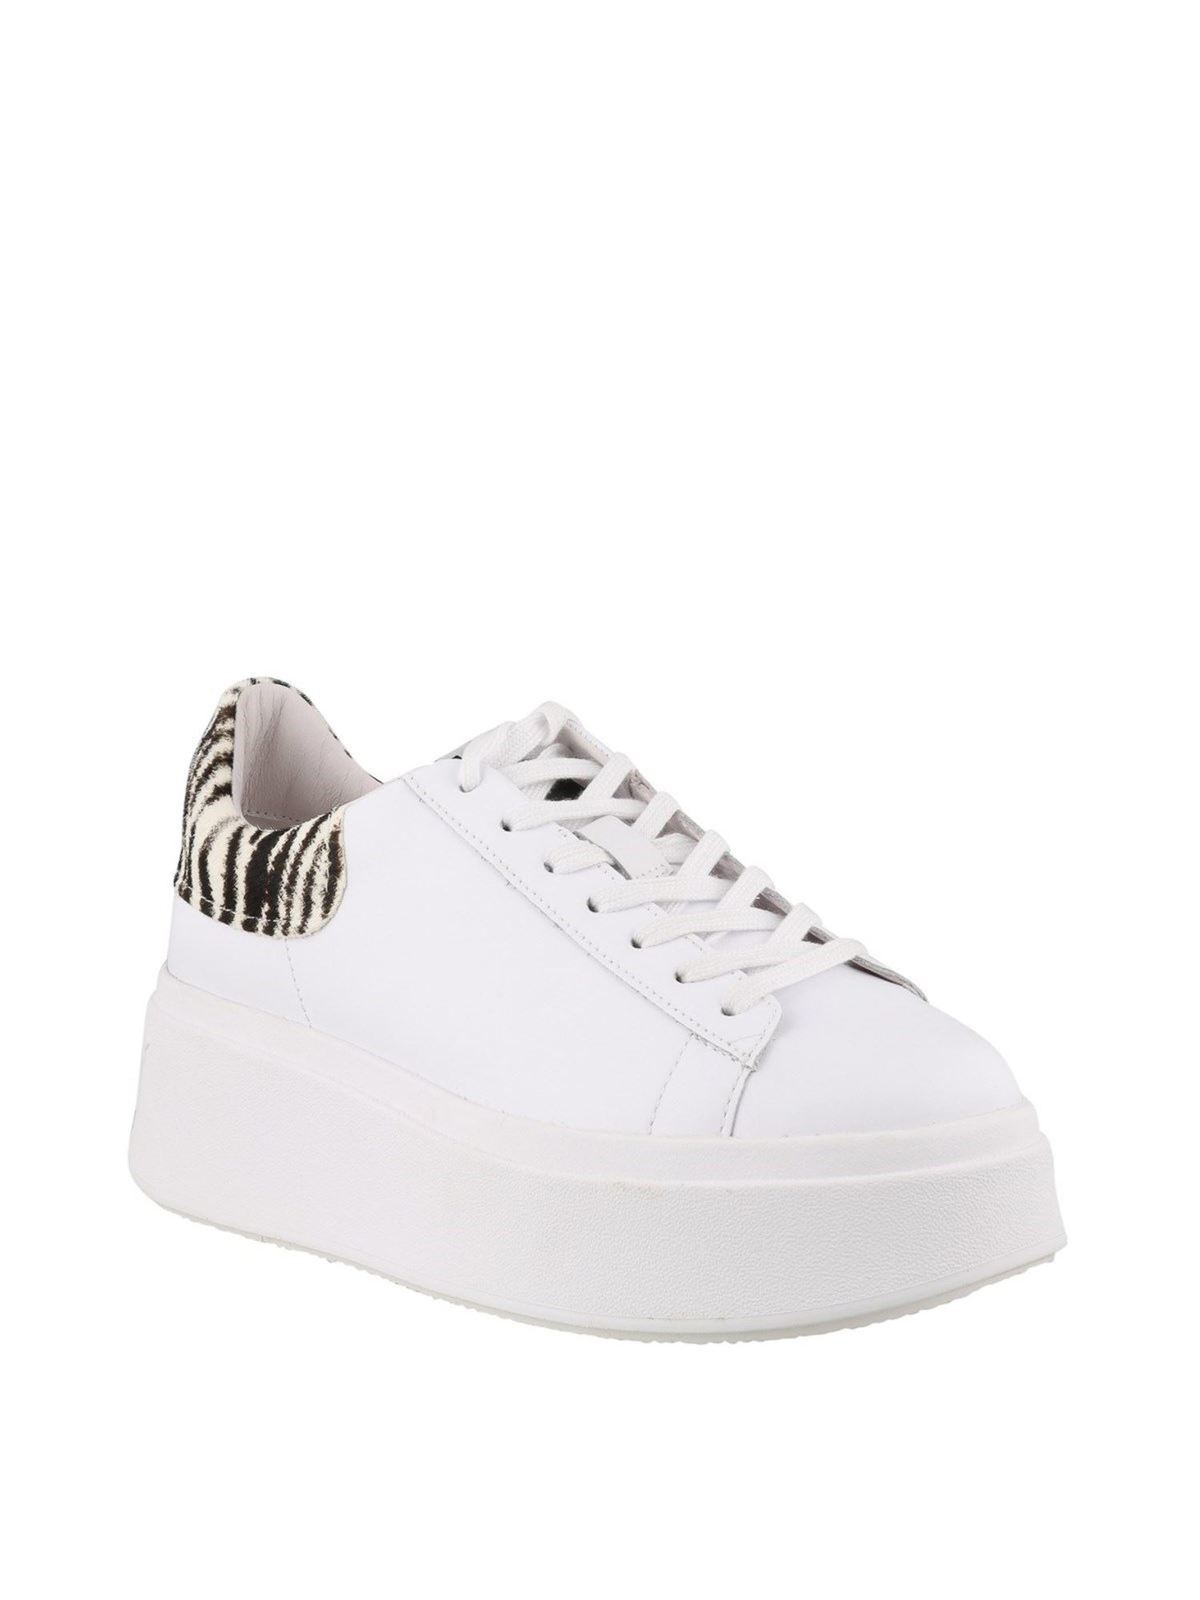 Wolkenkrabber Kabelbaan Speciaal Trainers Ash - Moby sneakers in white - MOBYSS20S133641002